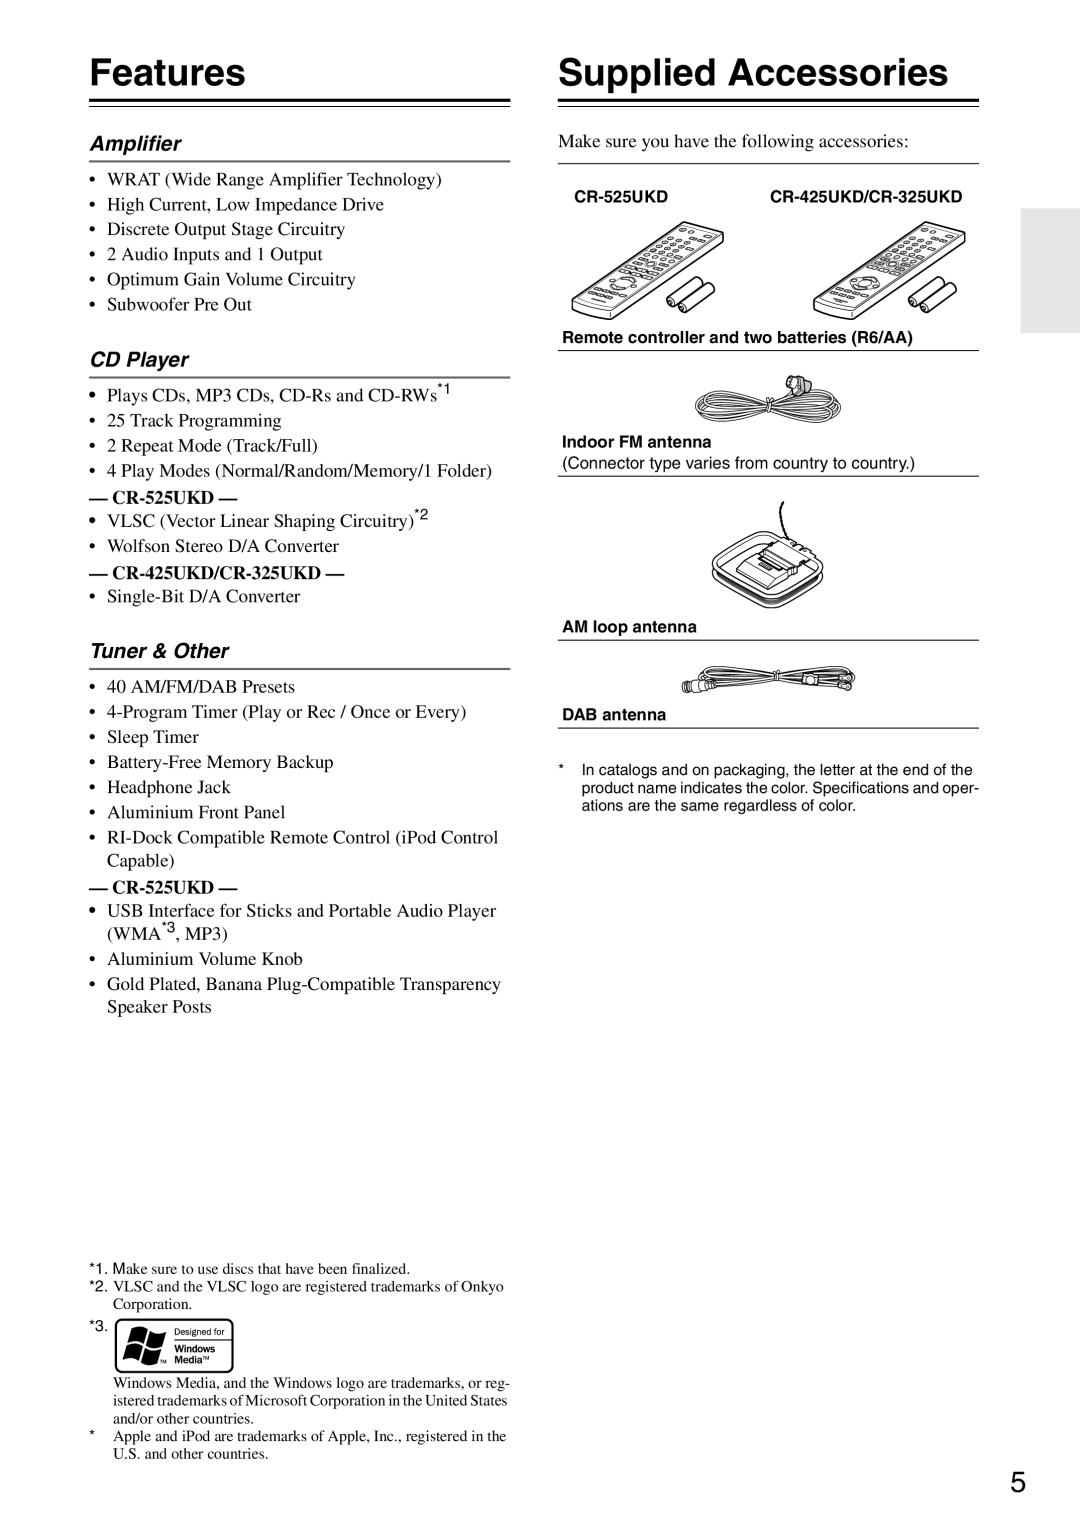 Onkyo CR-525UKD, CR-325UKD, CR-425UKD instruction manual Features, Supplied Accessories, Amplifier, CD Player, Tuner & Other 